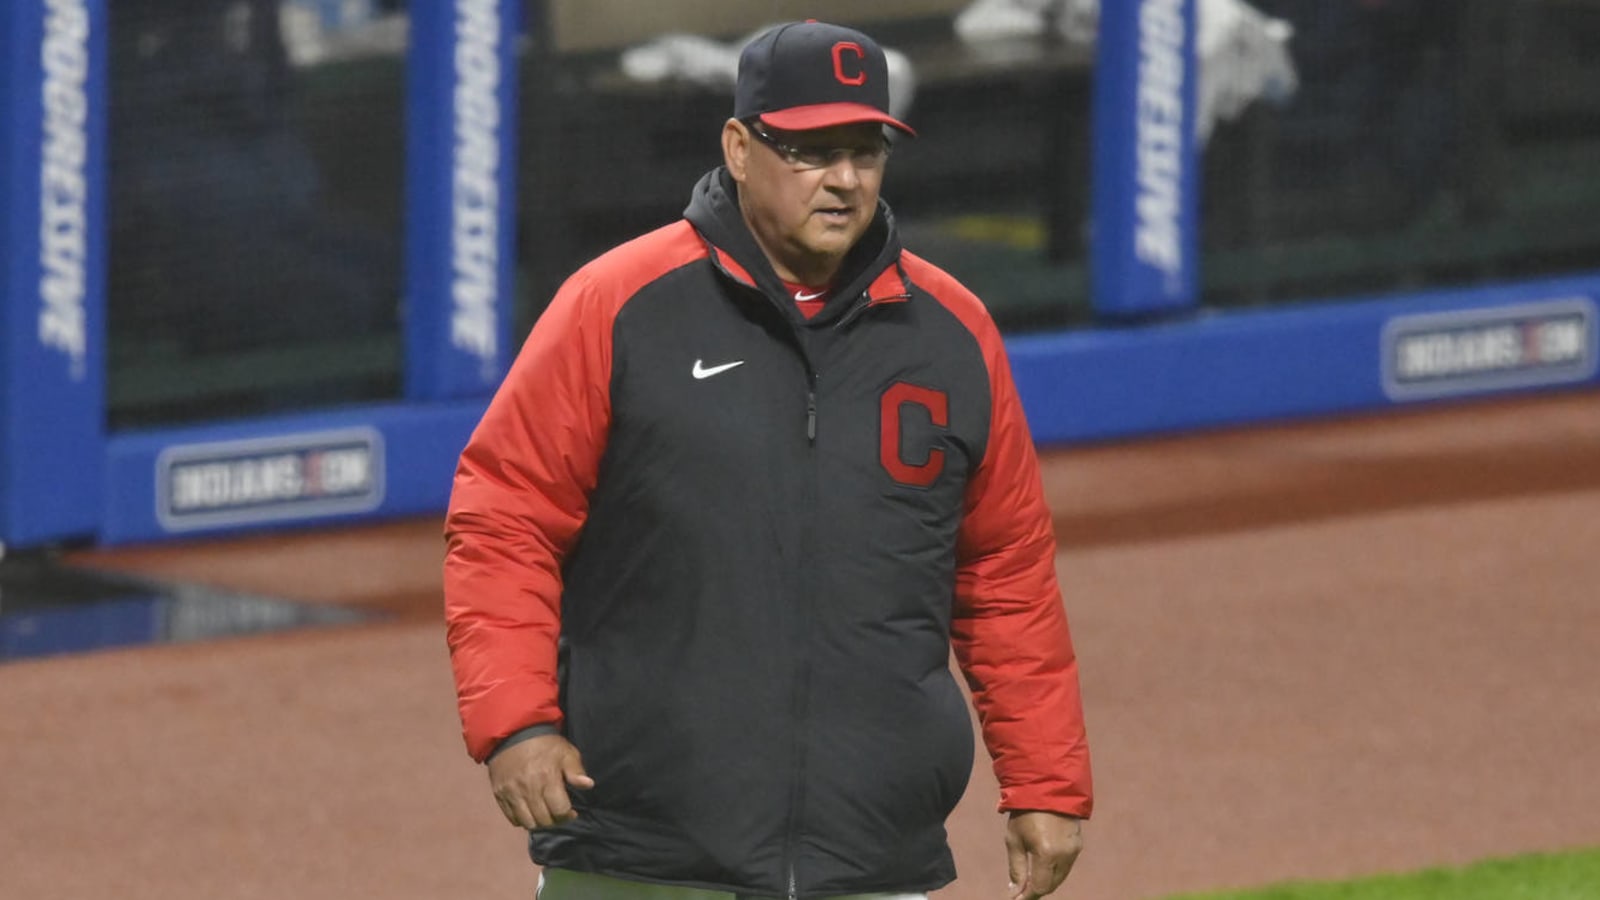 Cleveland manager Terry Francona steps away from team for remainder of 2021 season